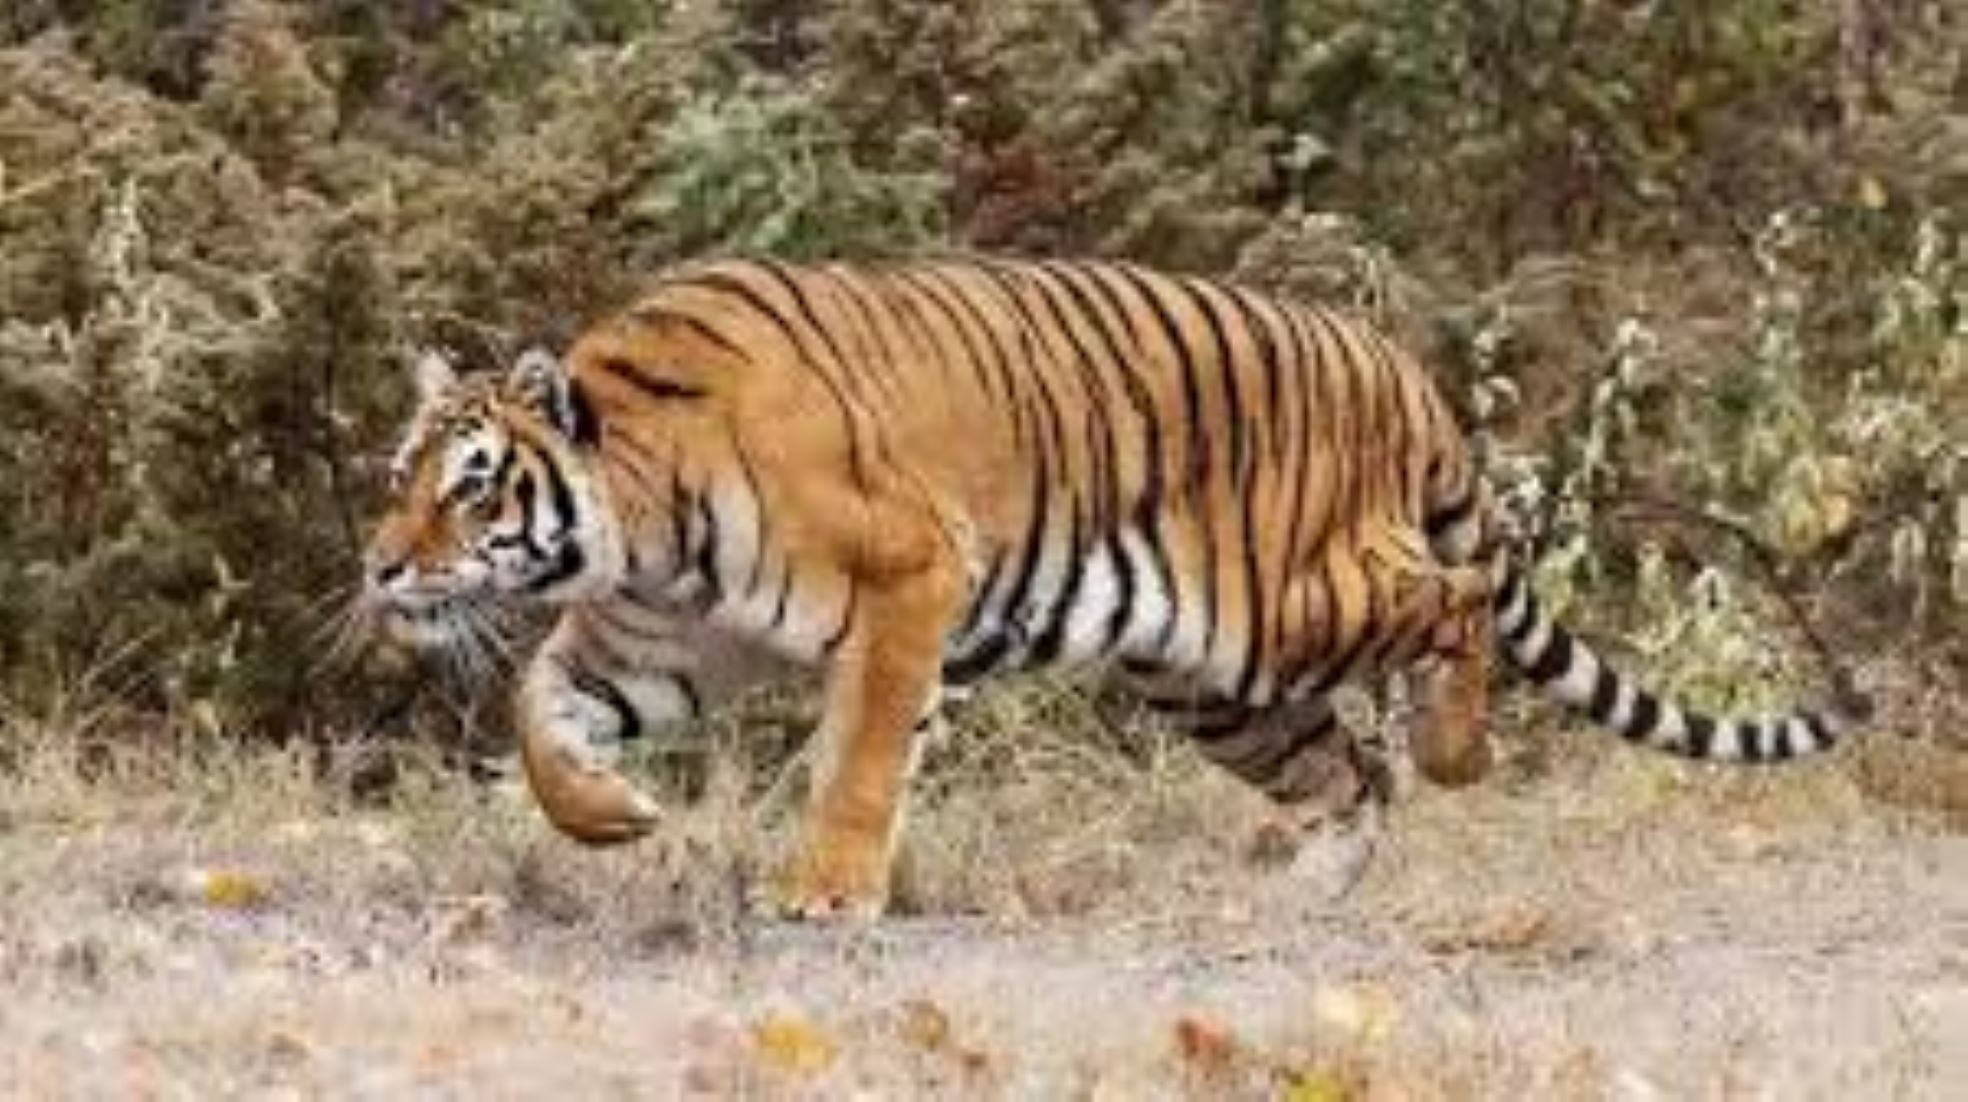 Forest Officials Issued Red Alert In India’s Madhya Pradesh After Tiger Killed Man